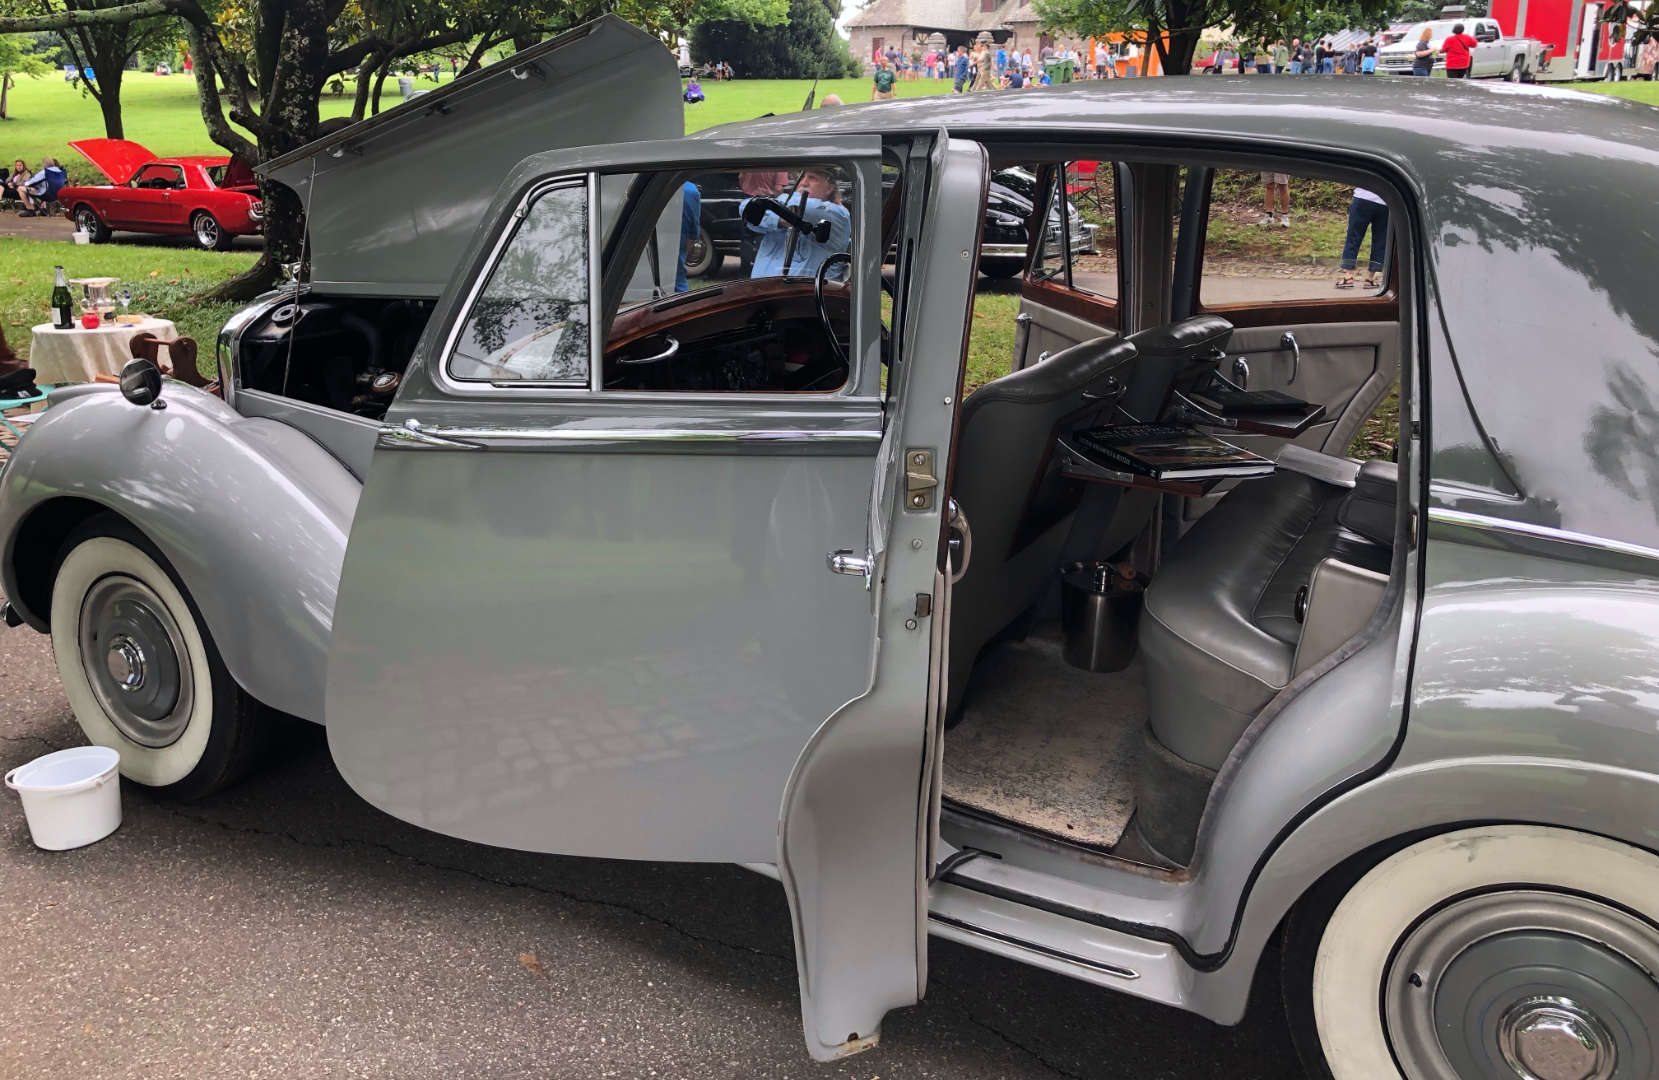 A little antique car show, time in a park, and wine? Count us in!